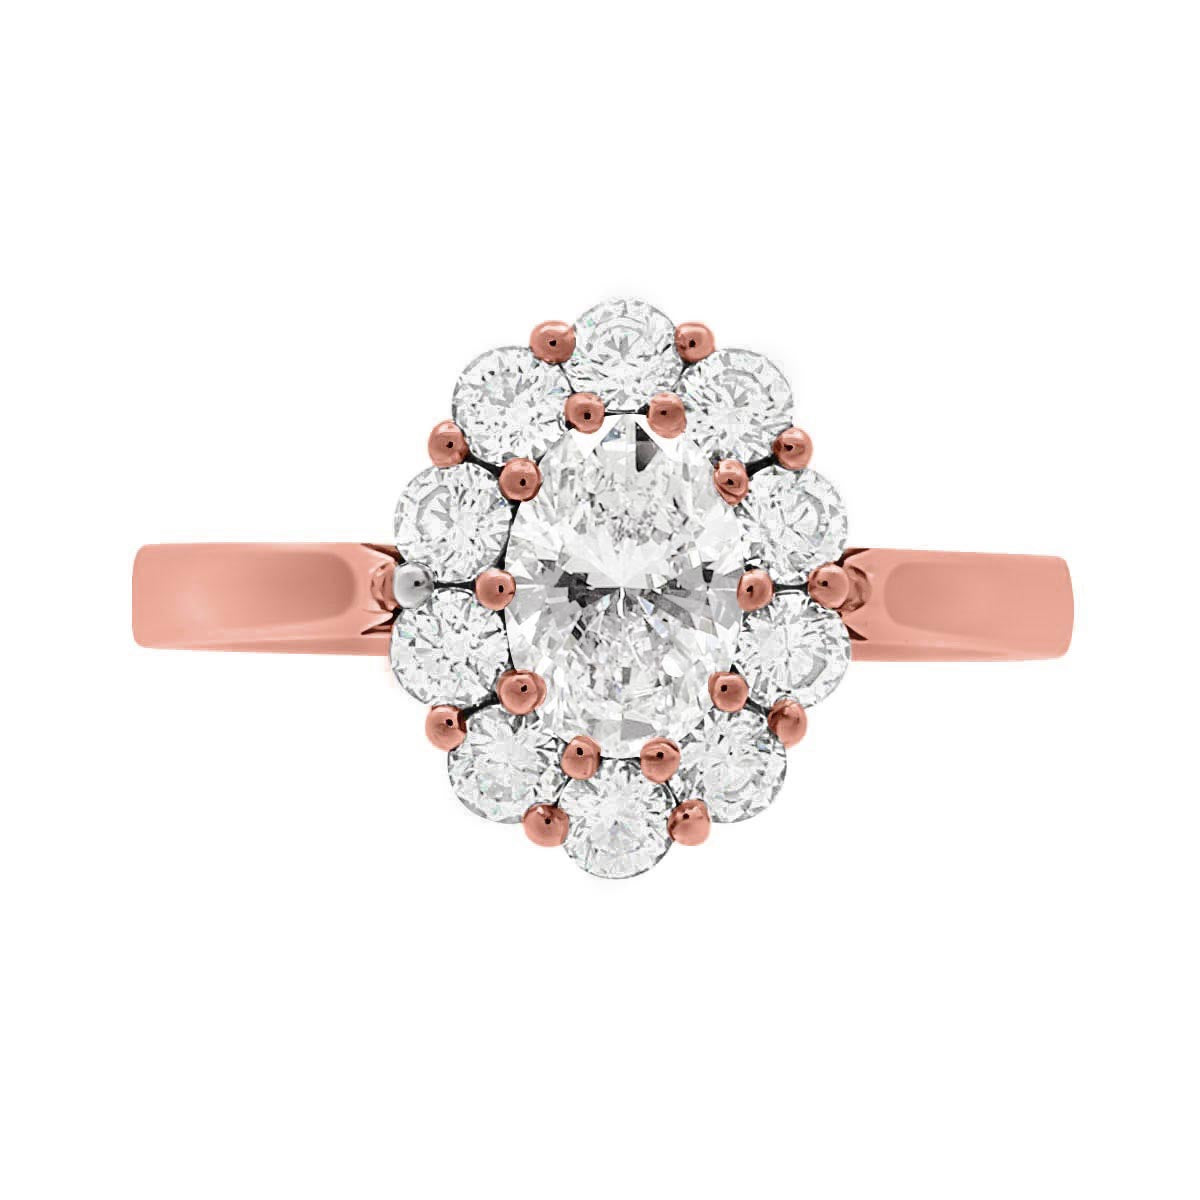 Cluster Engagement Ring in rose gold